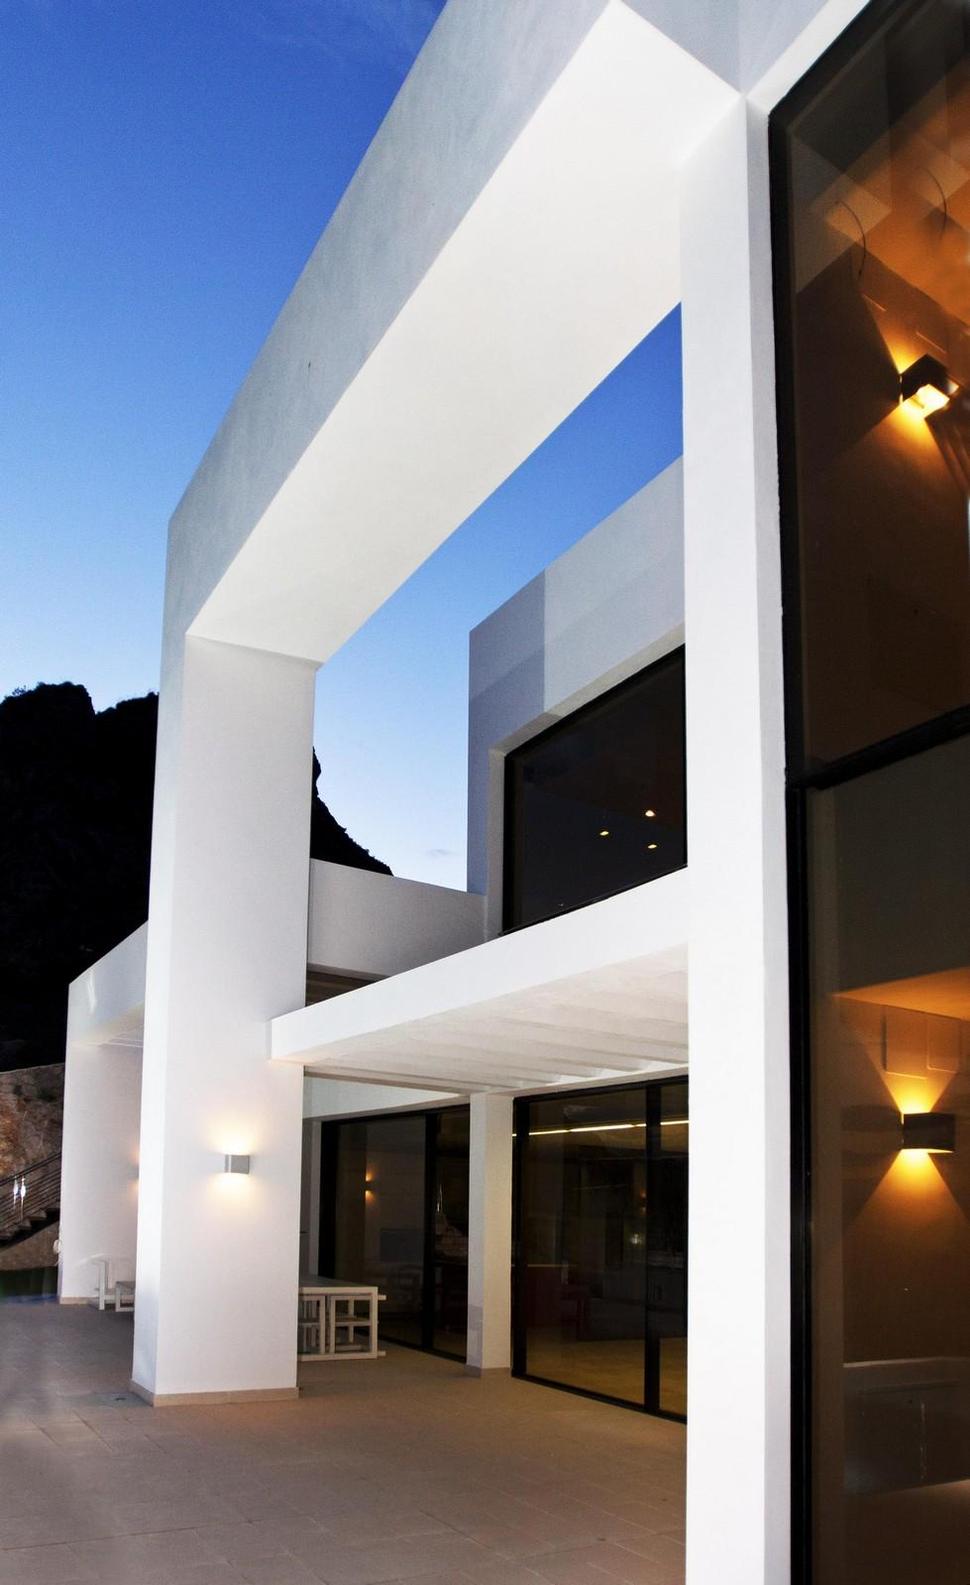 concrete-home-2nd-level-pool-360-degree-views-5-post-and-beam.jpg